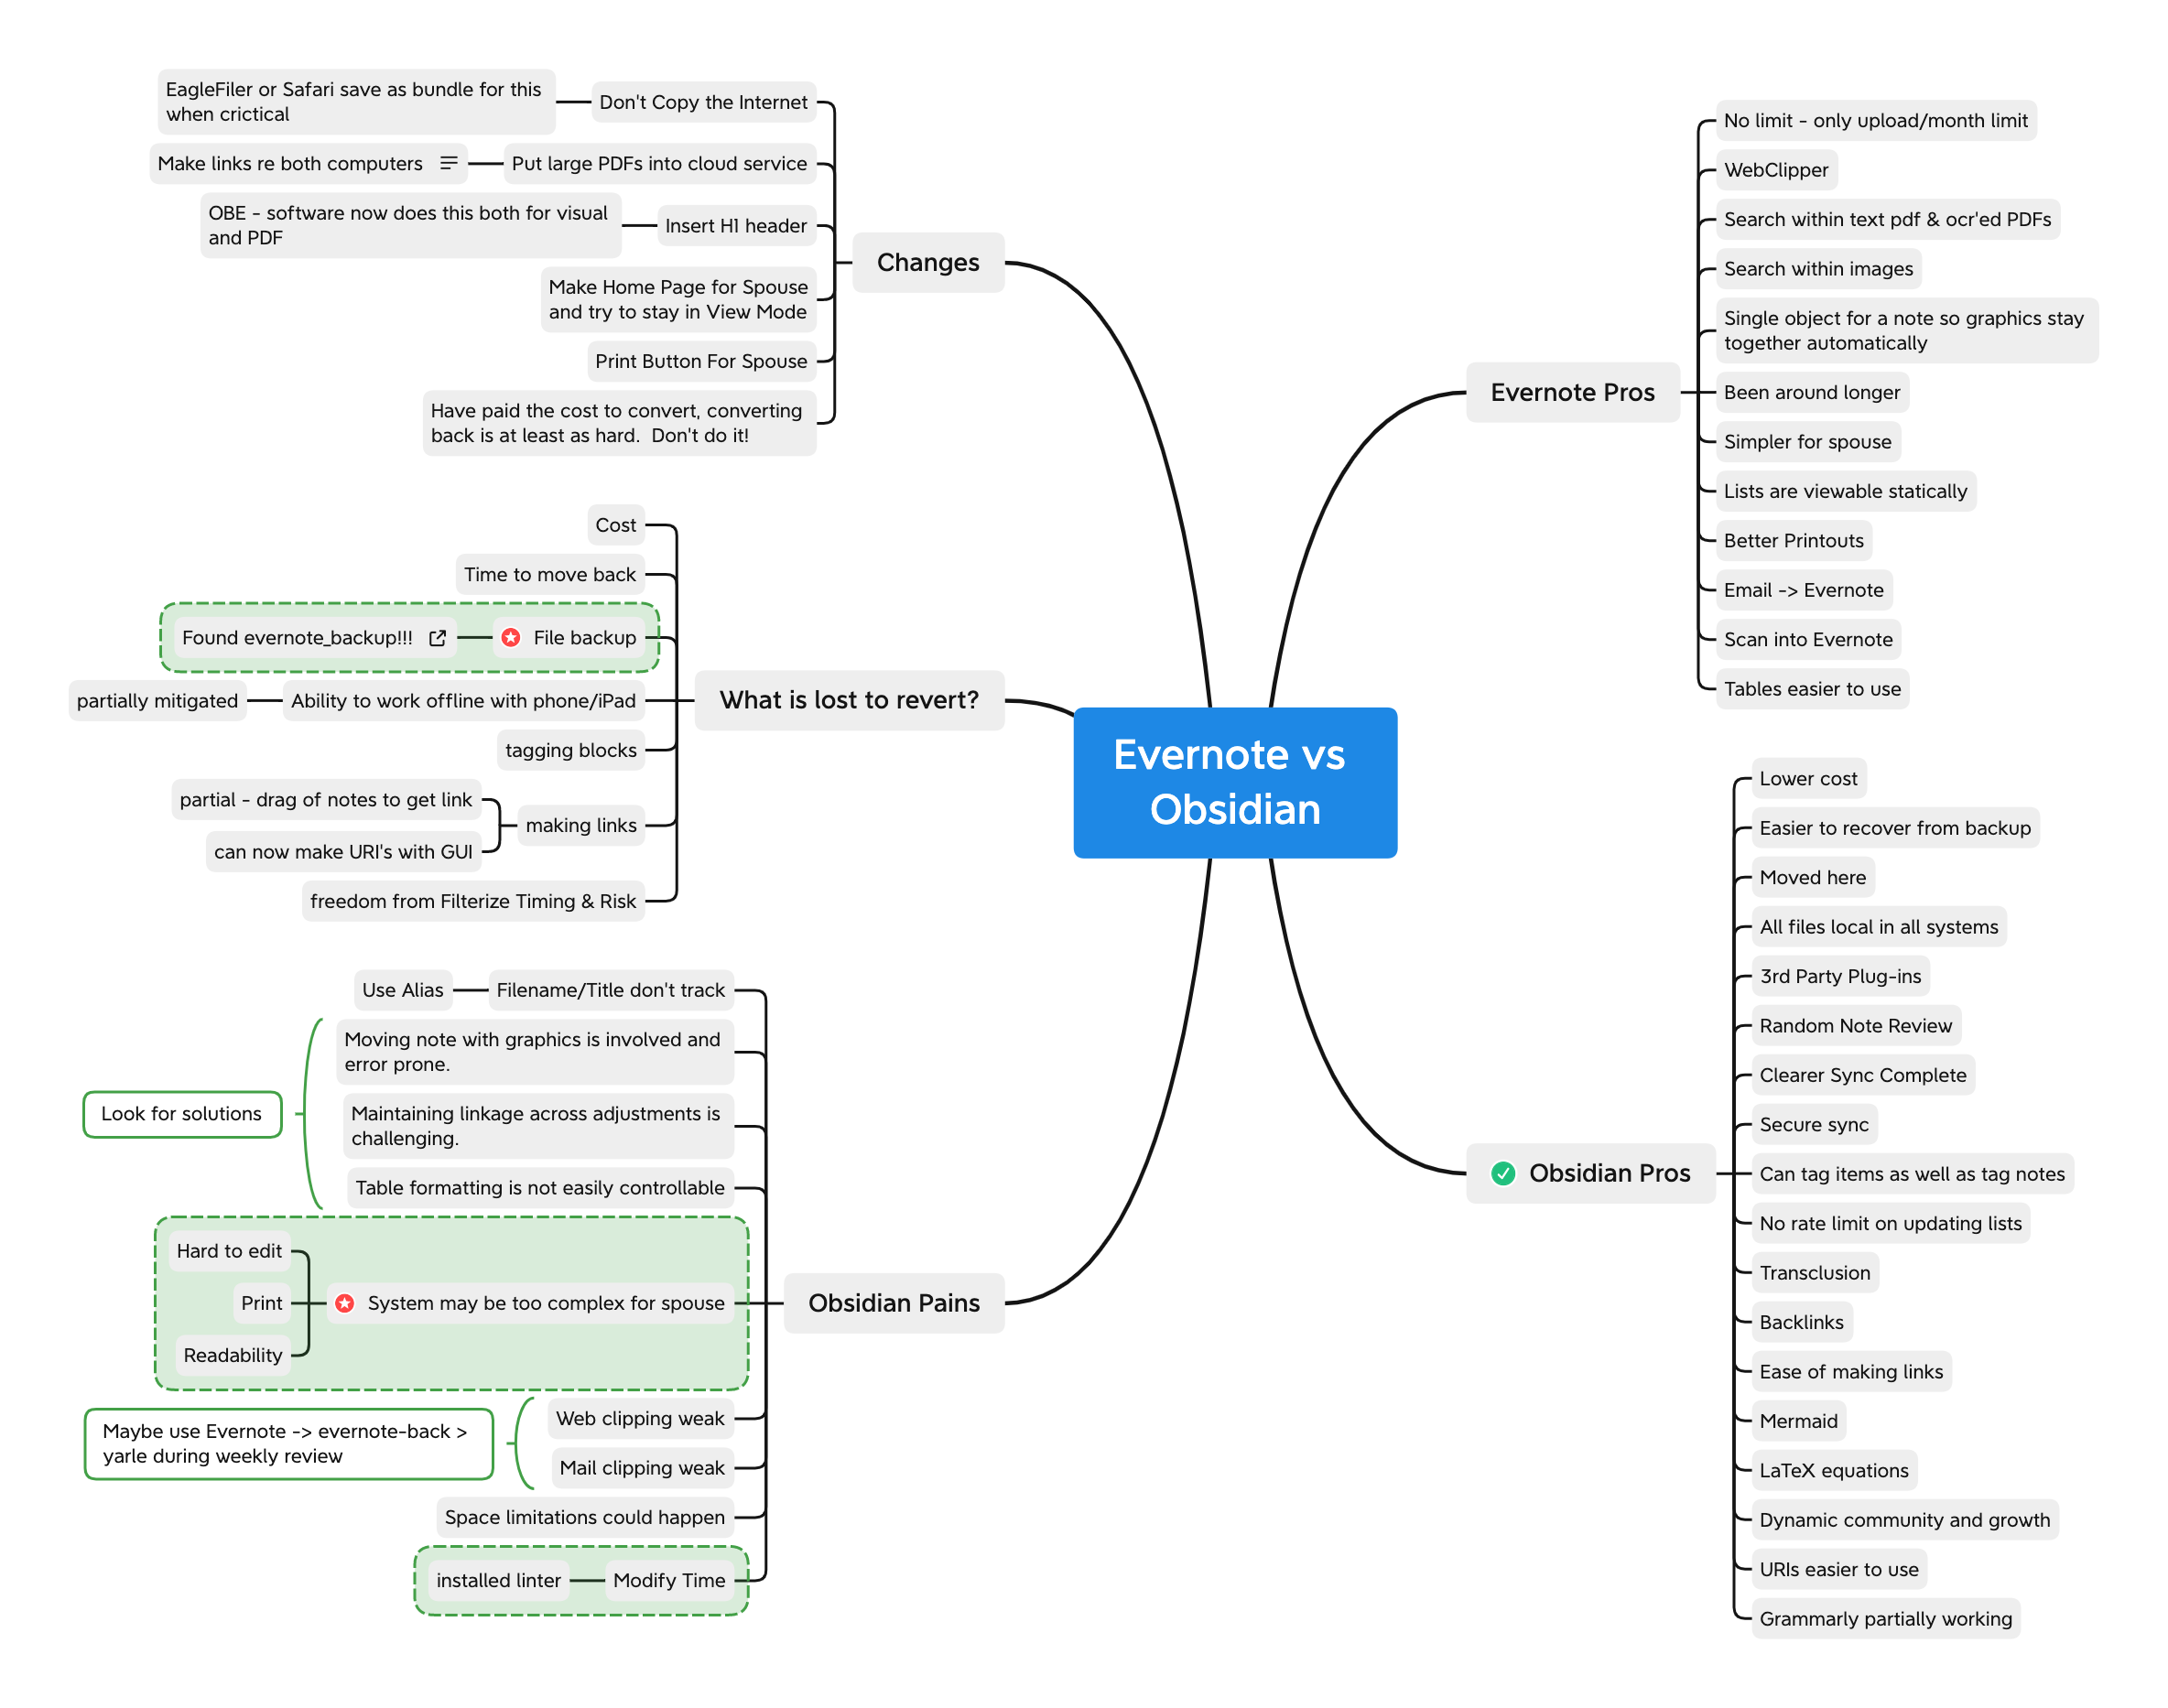 Evernote vs Obsidian Mindmap done in XMind by author